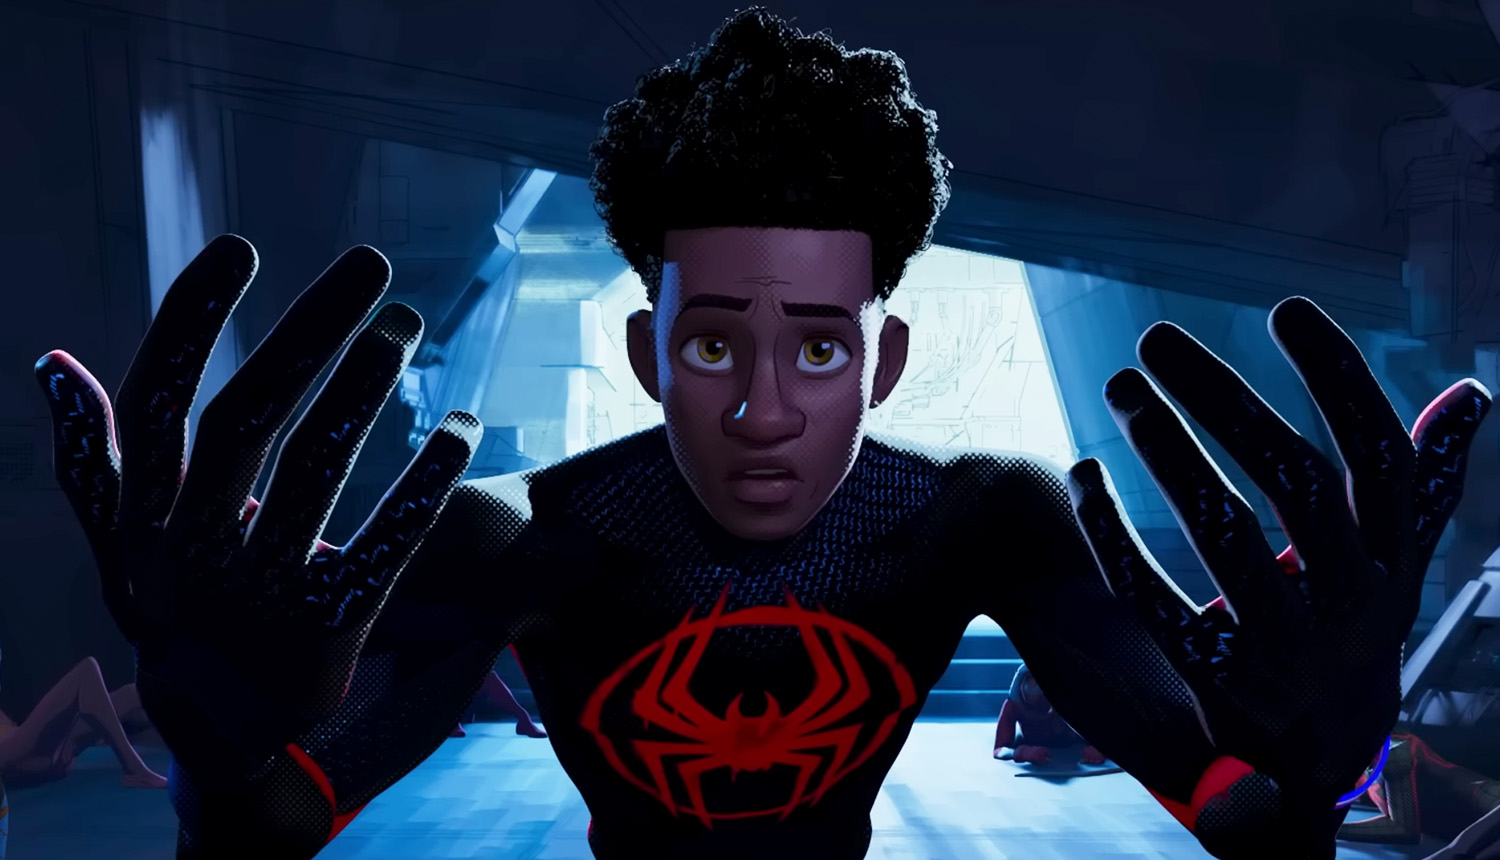 Spider-Man: Across the Spider-Verse - Plugged In